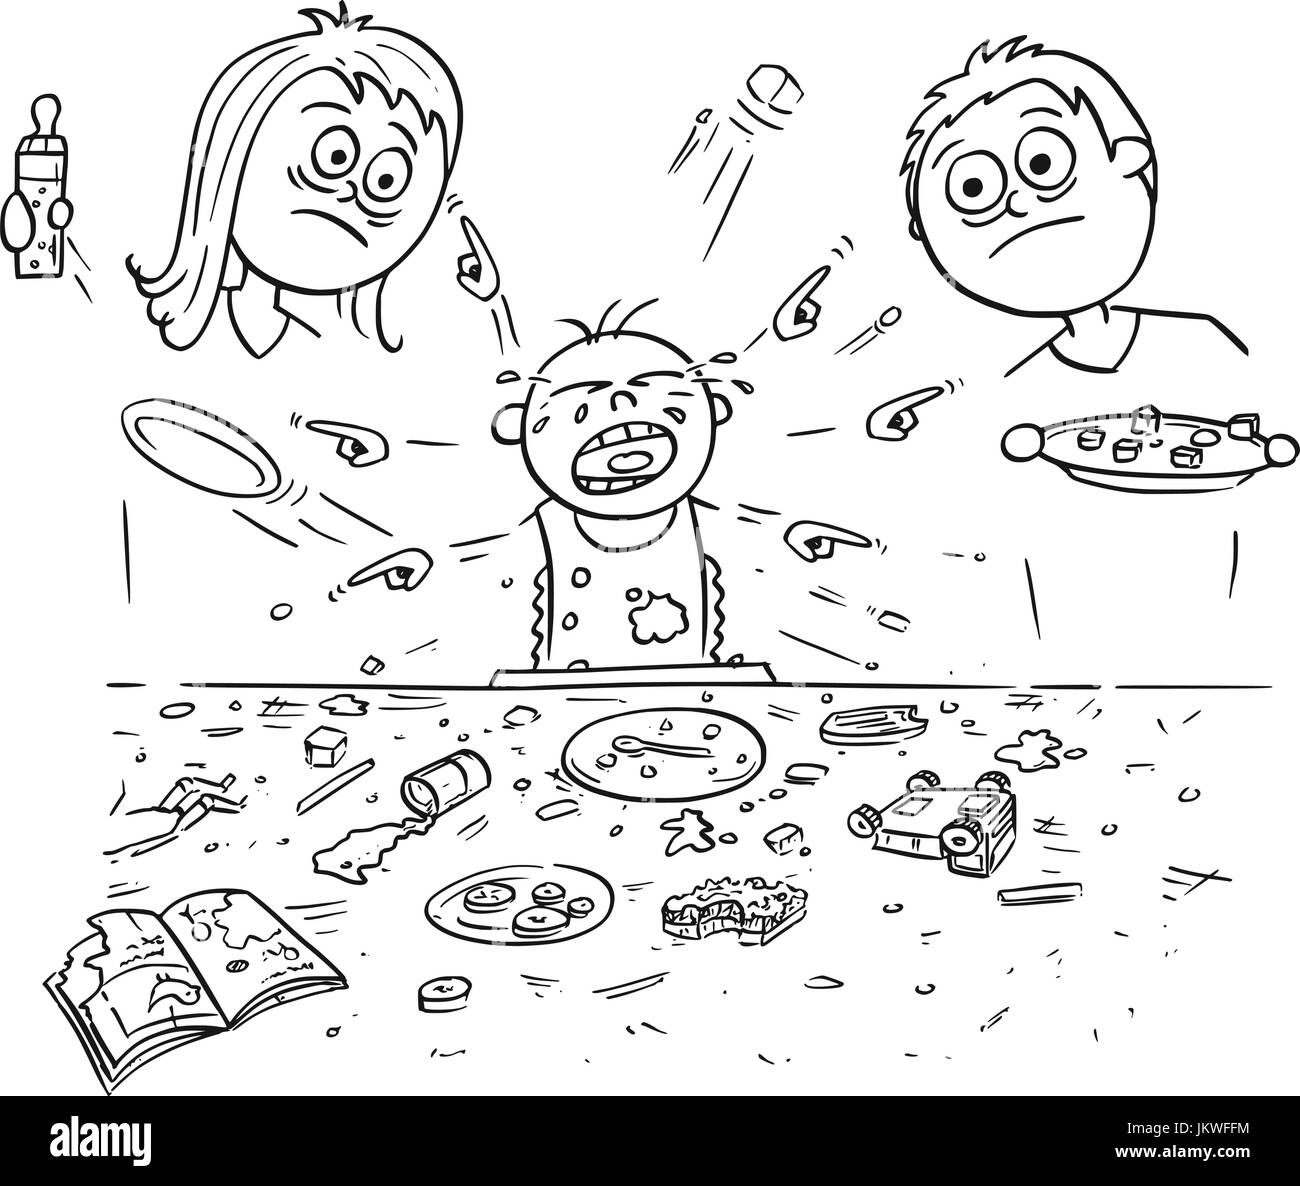 Hand drawing cartoon vector illustration of spoiled spoilt crying baby doing mess around during eating, pointing and demanding things all around. Unha Stock Vector